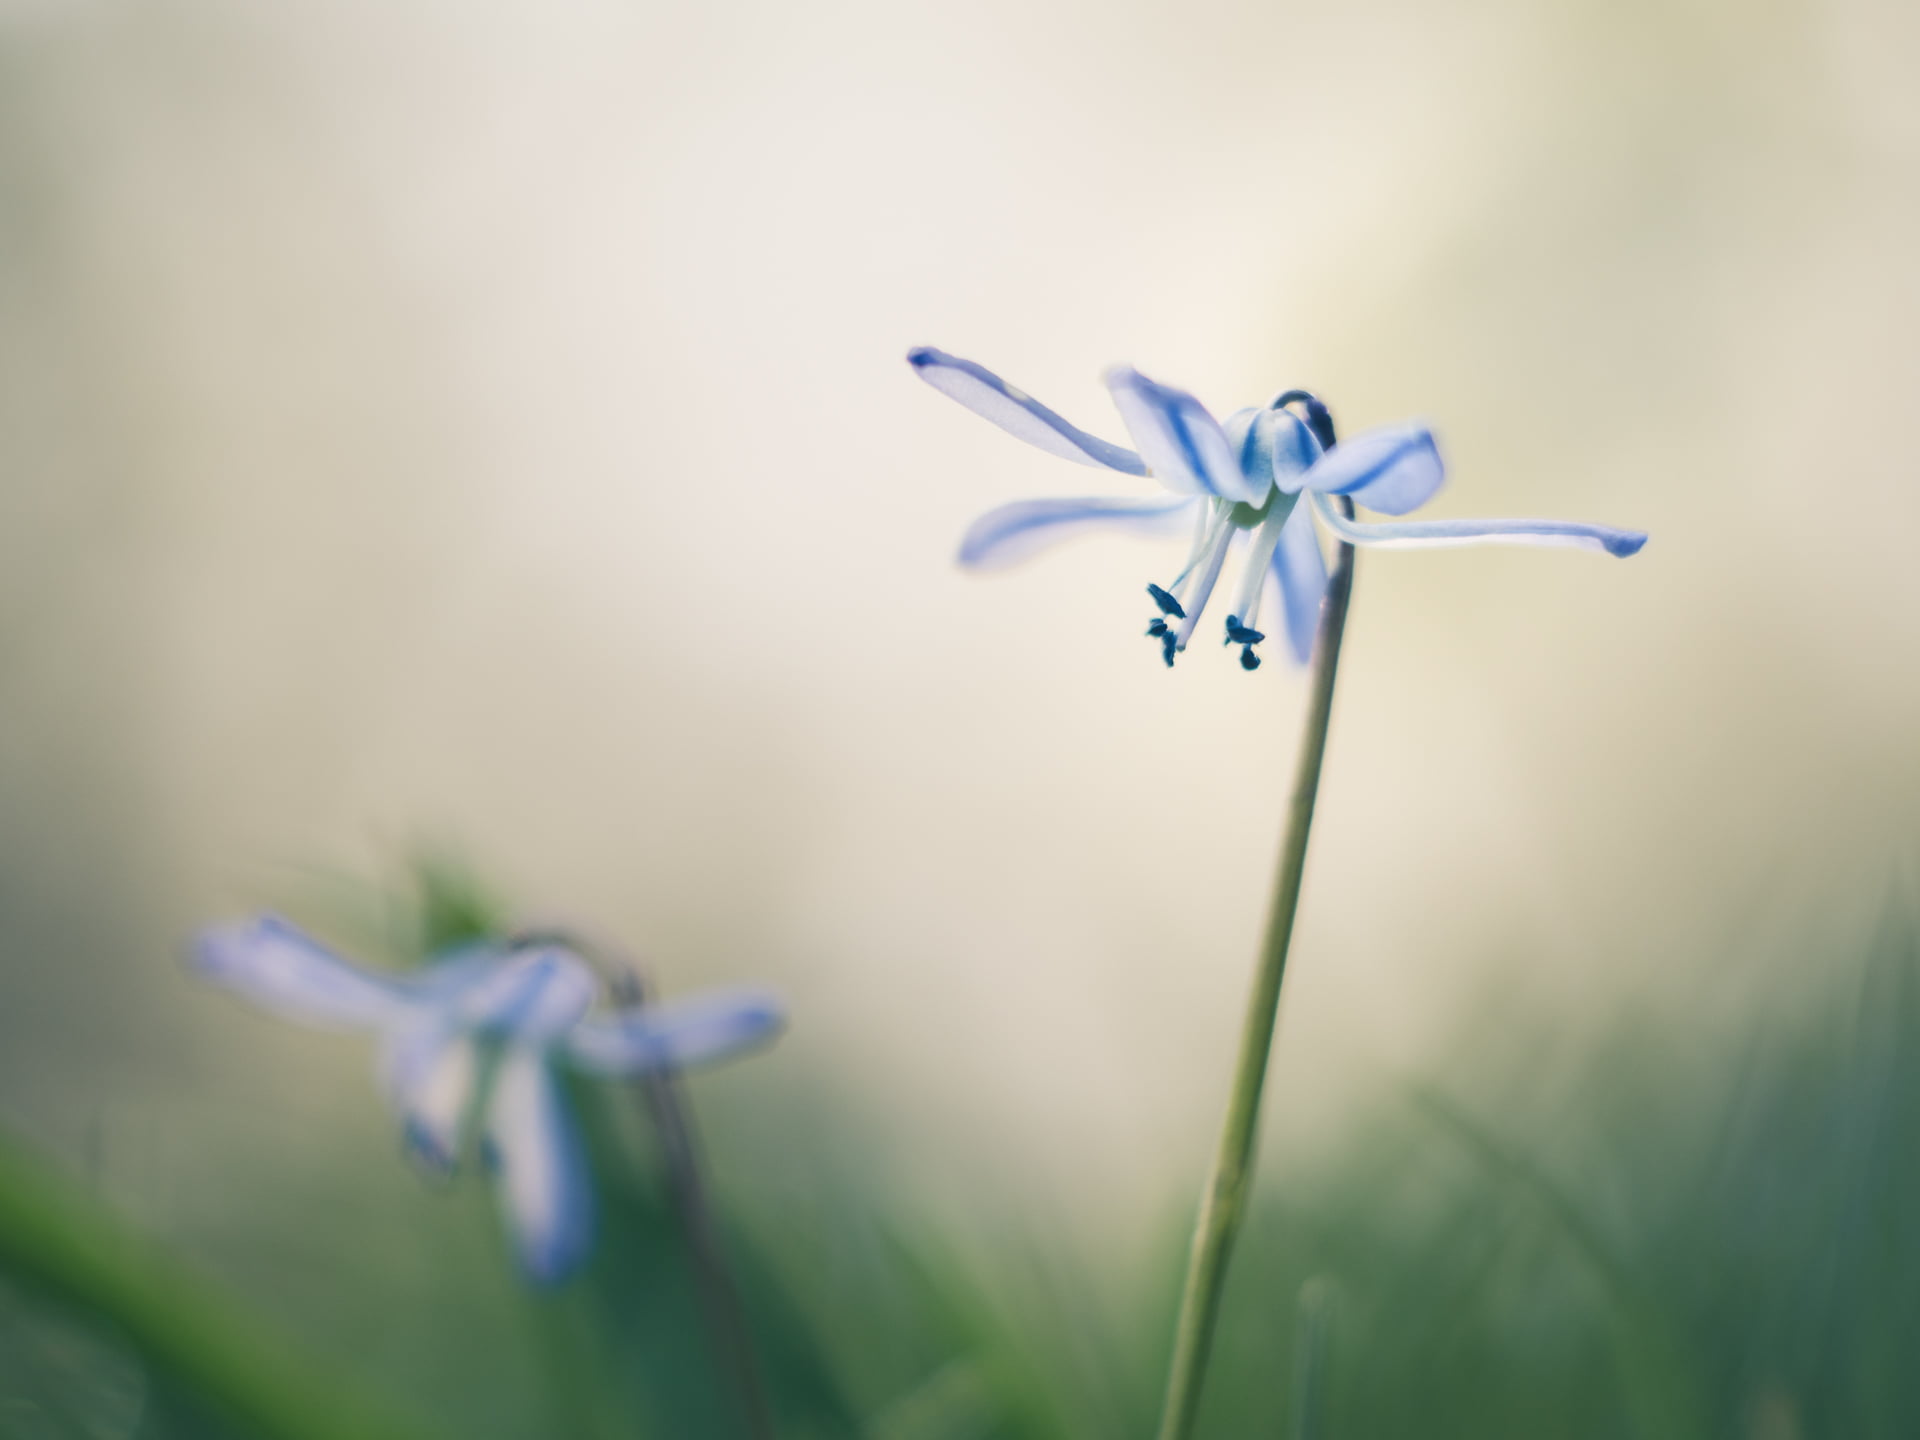 close up focus photo of two blue-and-white petaled flowers at daytime